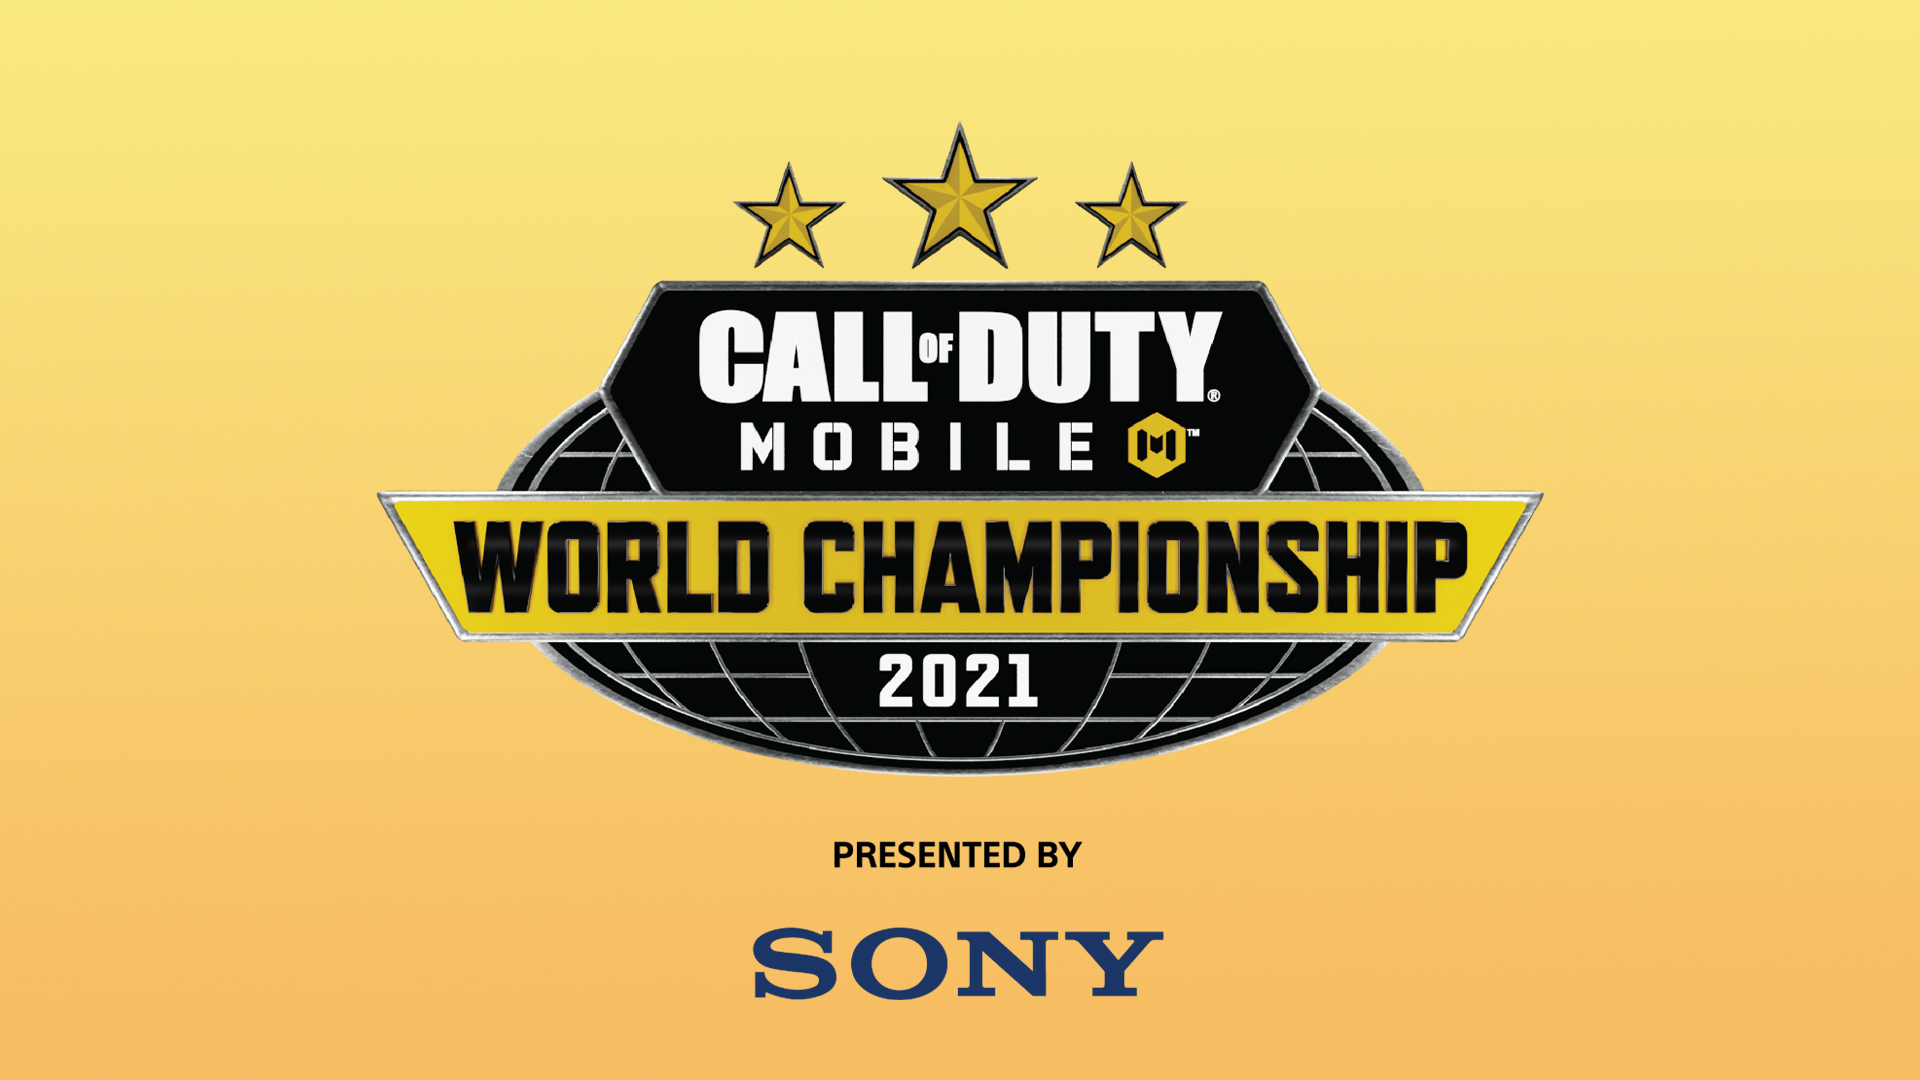 The Call of Duty Mobile World Championship returns with a US2M prize